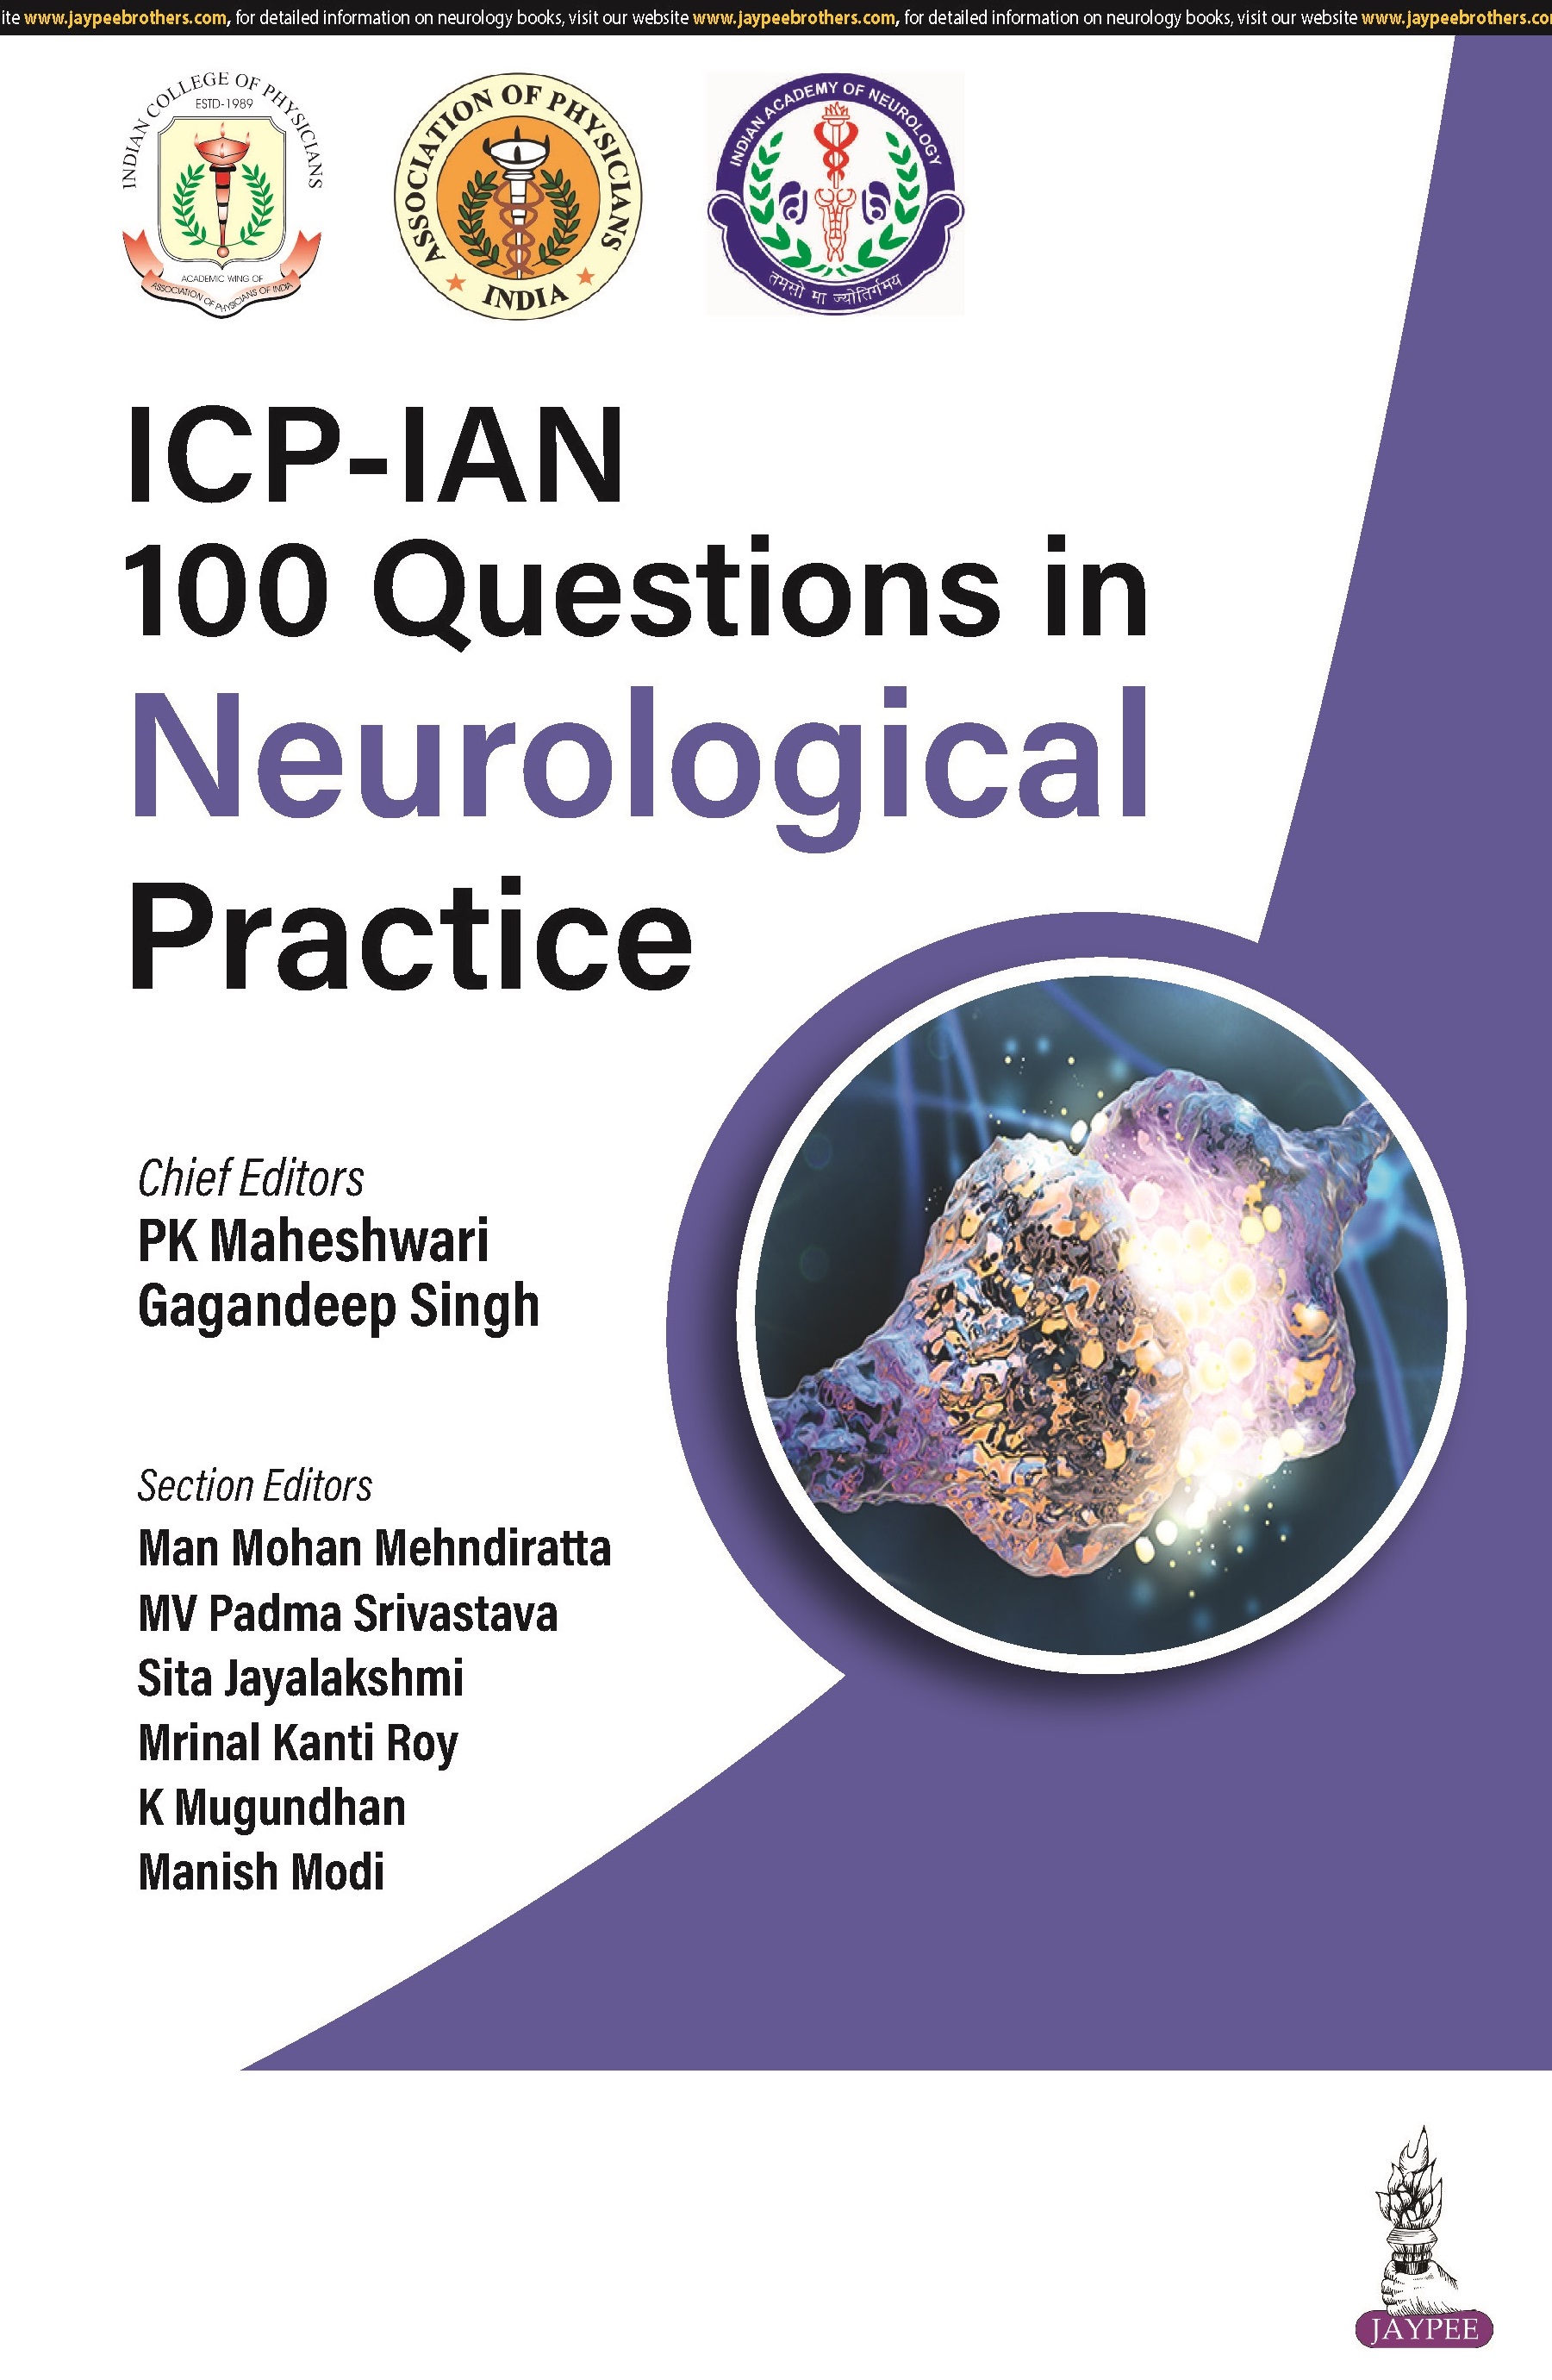 ICP-IAN 100 Questions in Neurological Practice